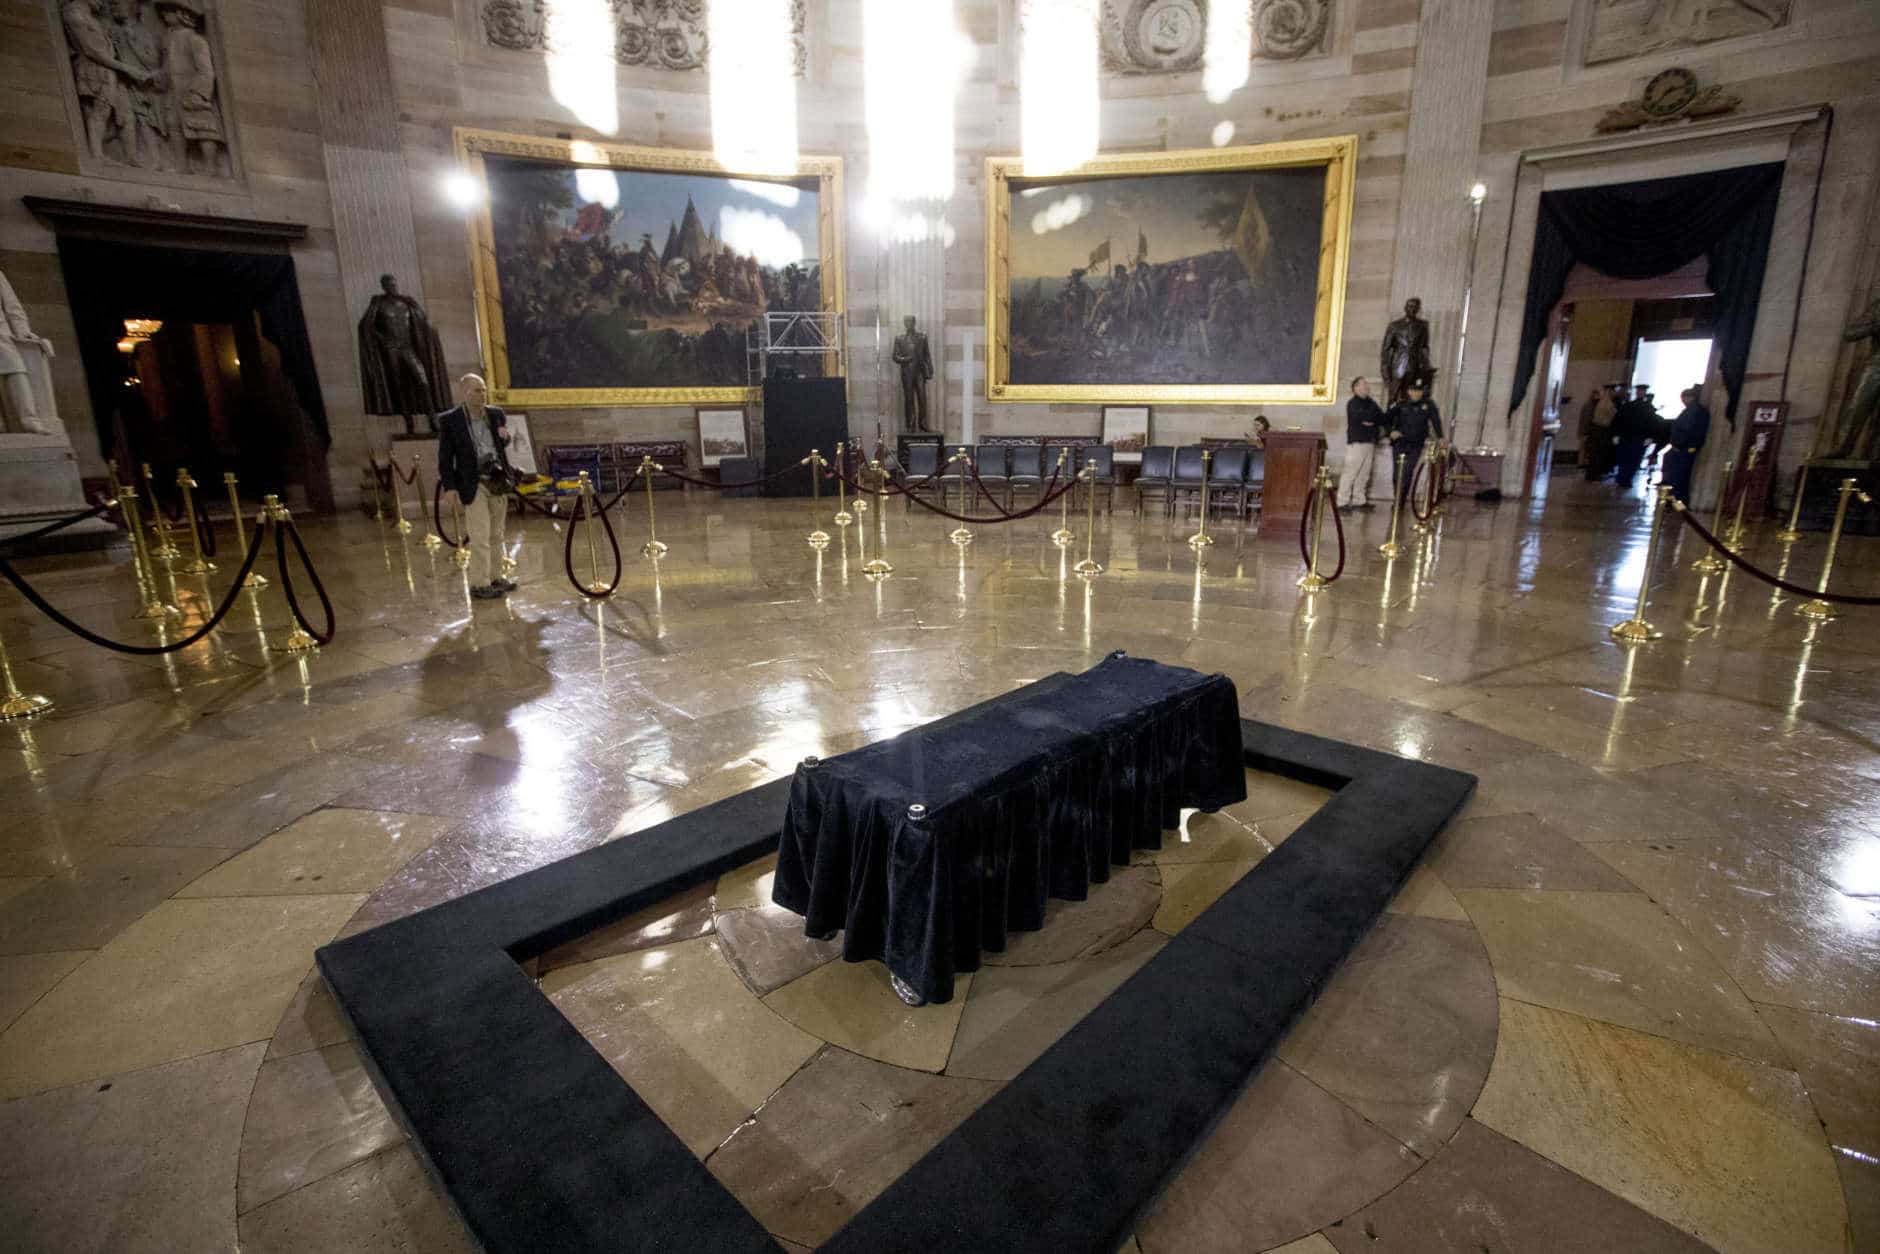 Crews prepare for the late Rev. Billy Graham to be honored Wednesday in the Rotunda of the Capitol Building, Tuesday, Feb. 27, 2018 in Washington. (AP Photo/Andrew Harnik)